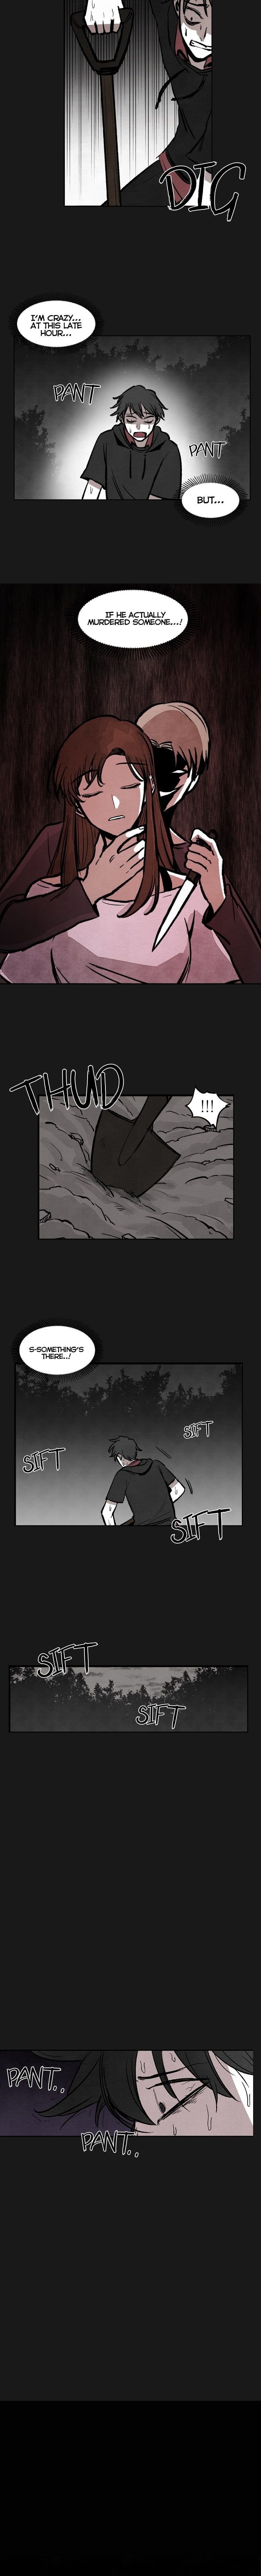 Devil’s Editing Chapter 2 - Page 7